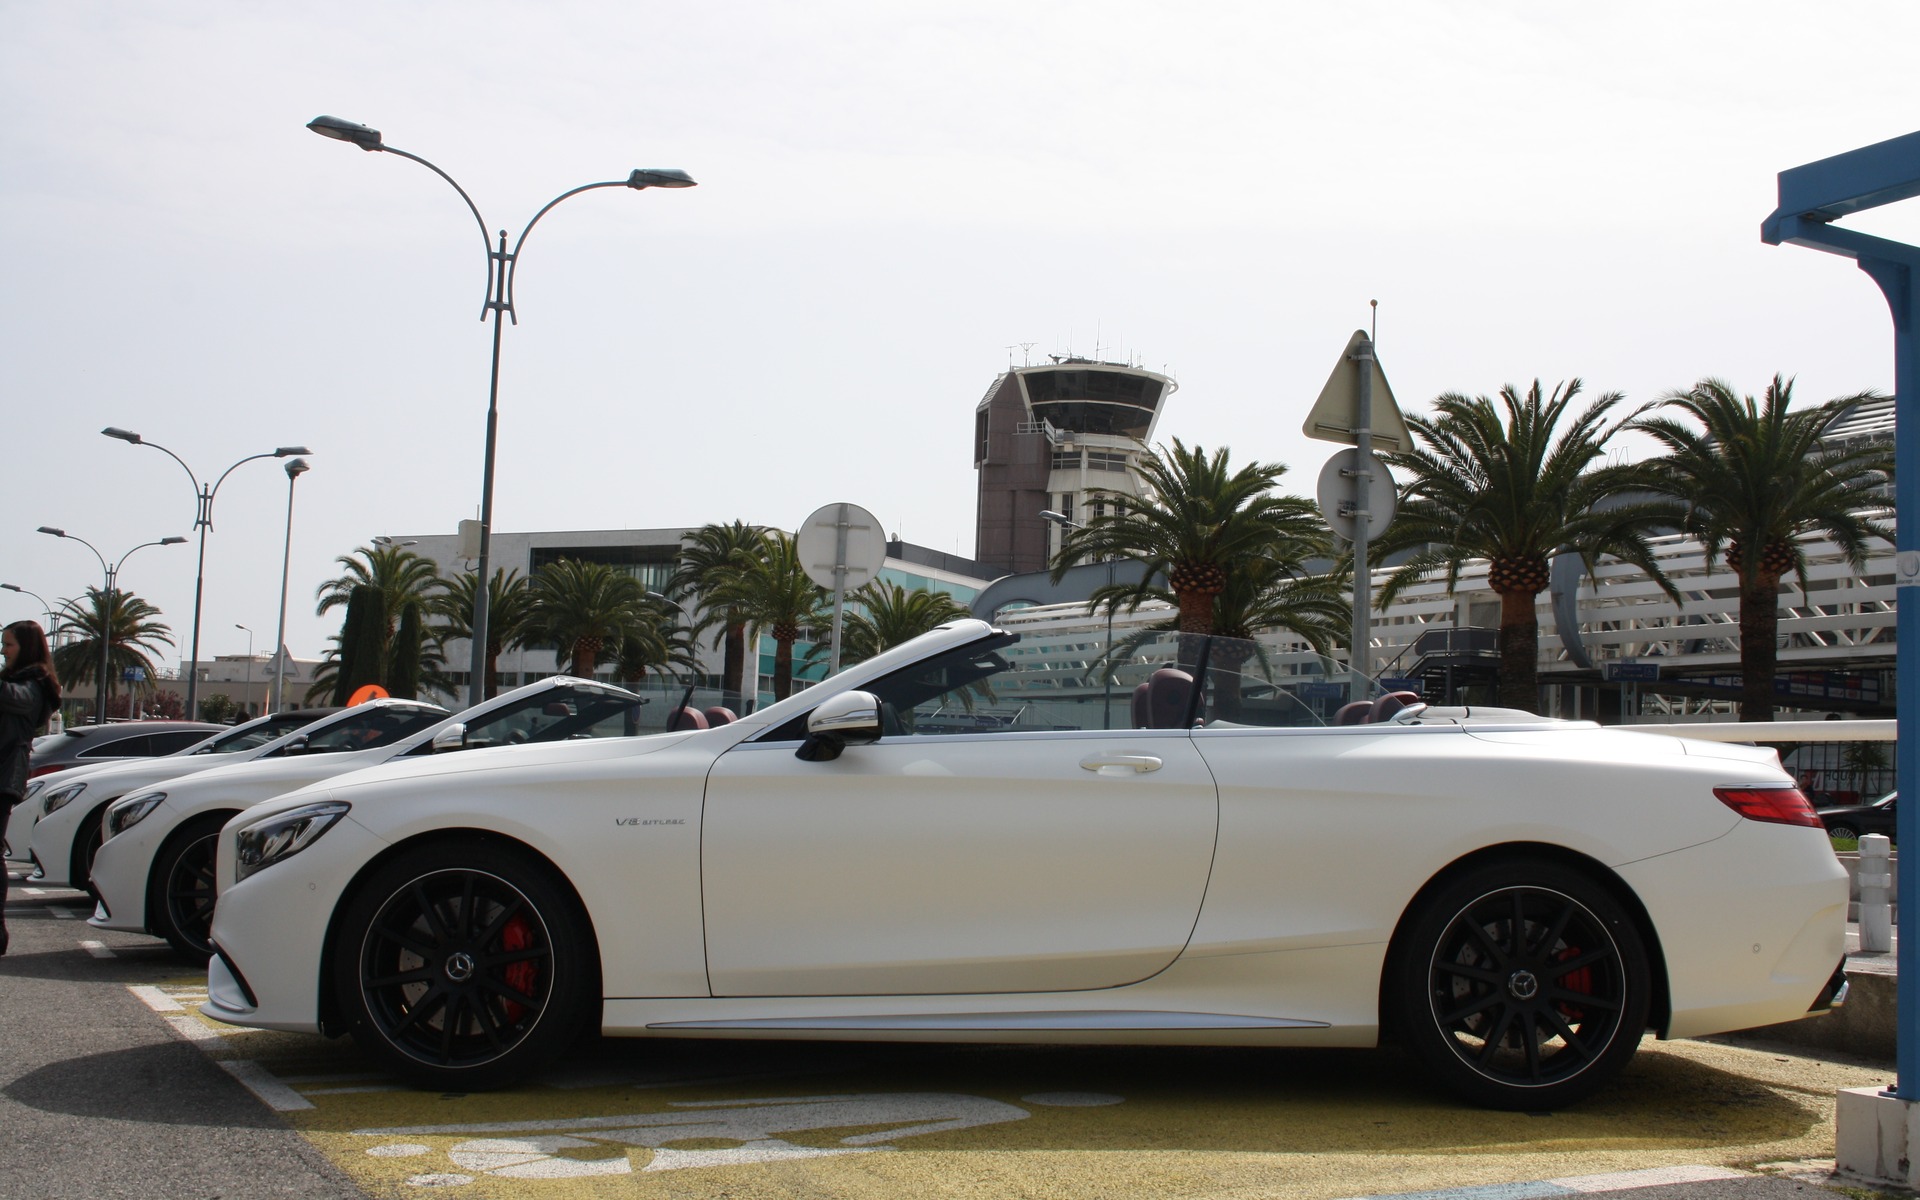 2017 Mercedes-AMG S 63 4MATIC Cabriolet